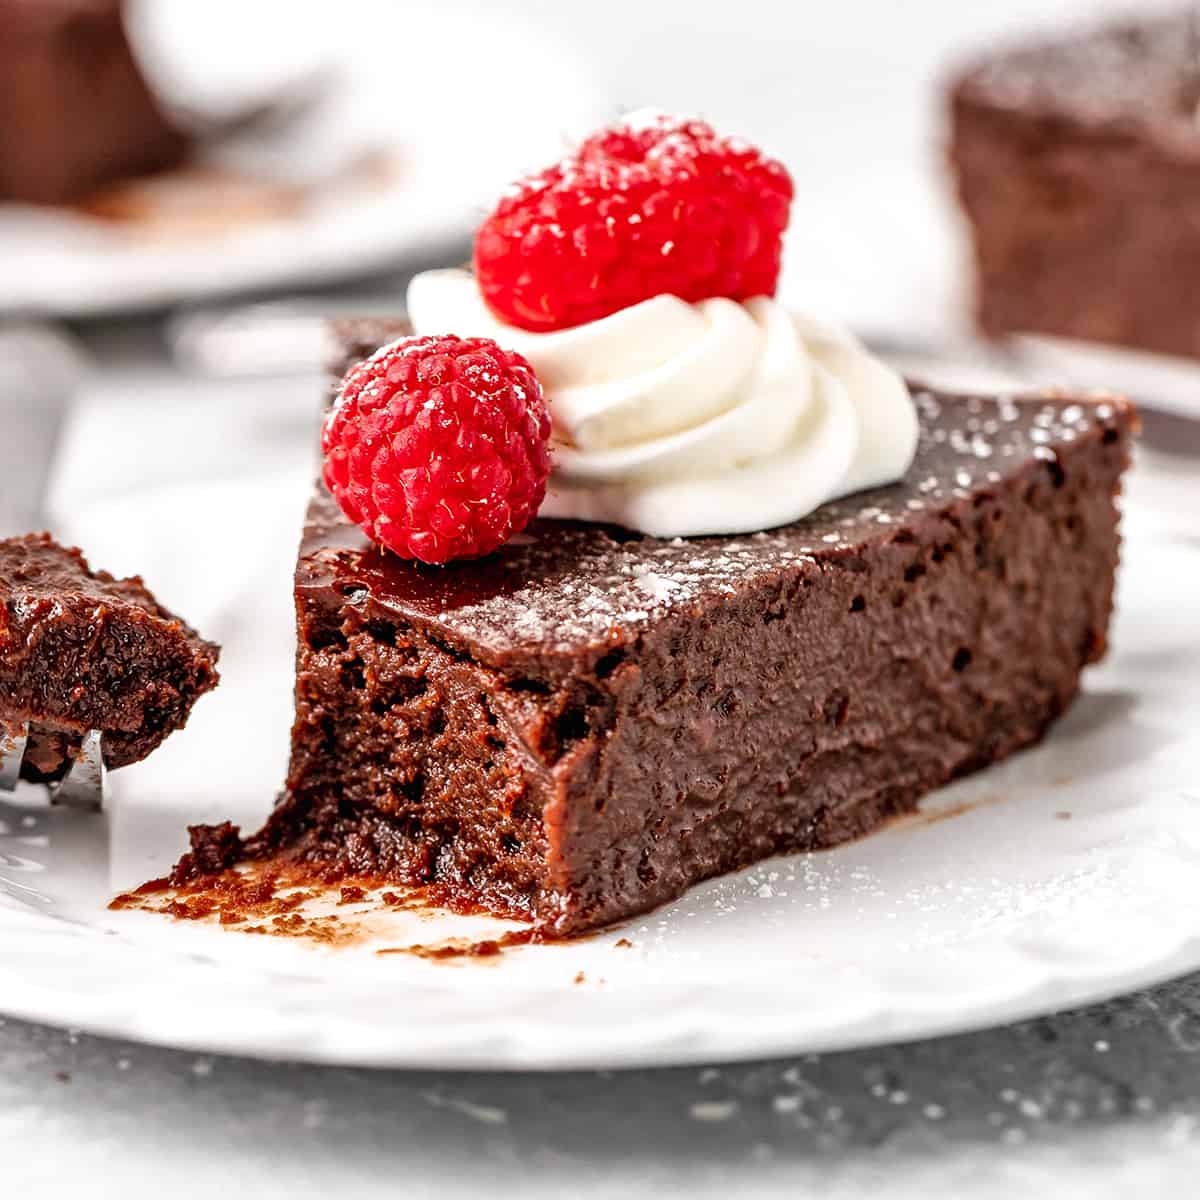 a piece of Flourless Chocolate Cake on a plate with a bite taken out of it, garnished with raspberries and whipped cream